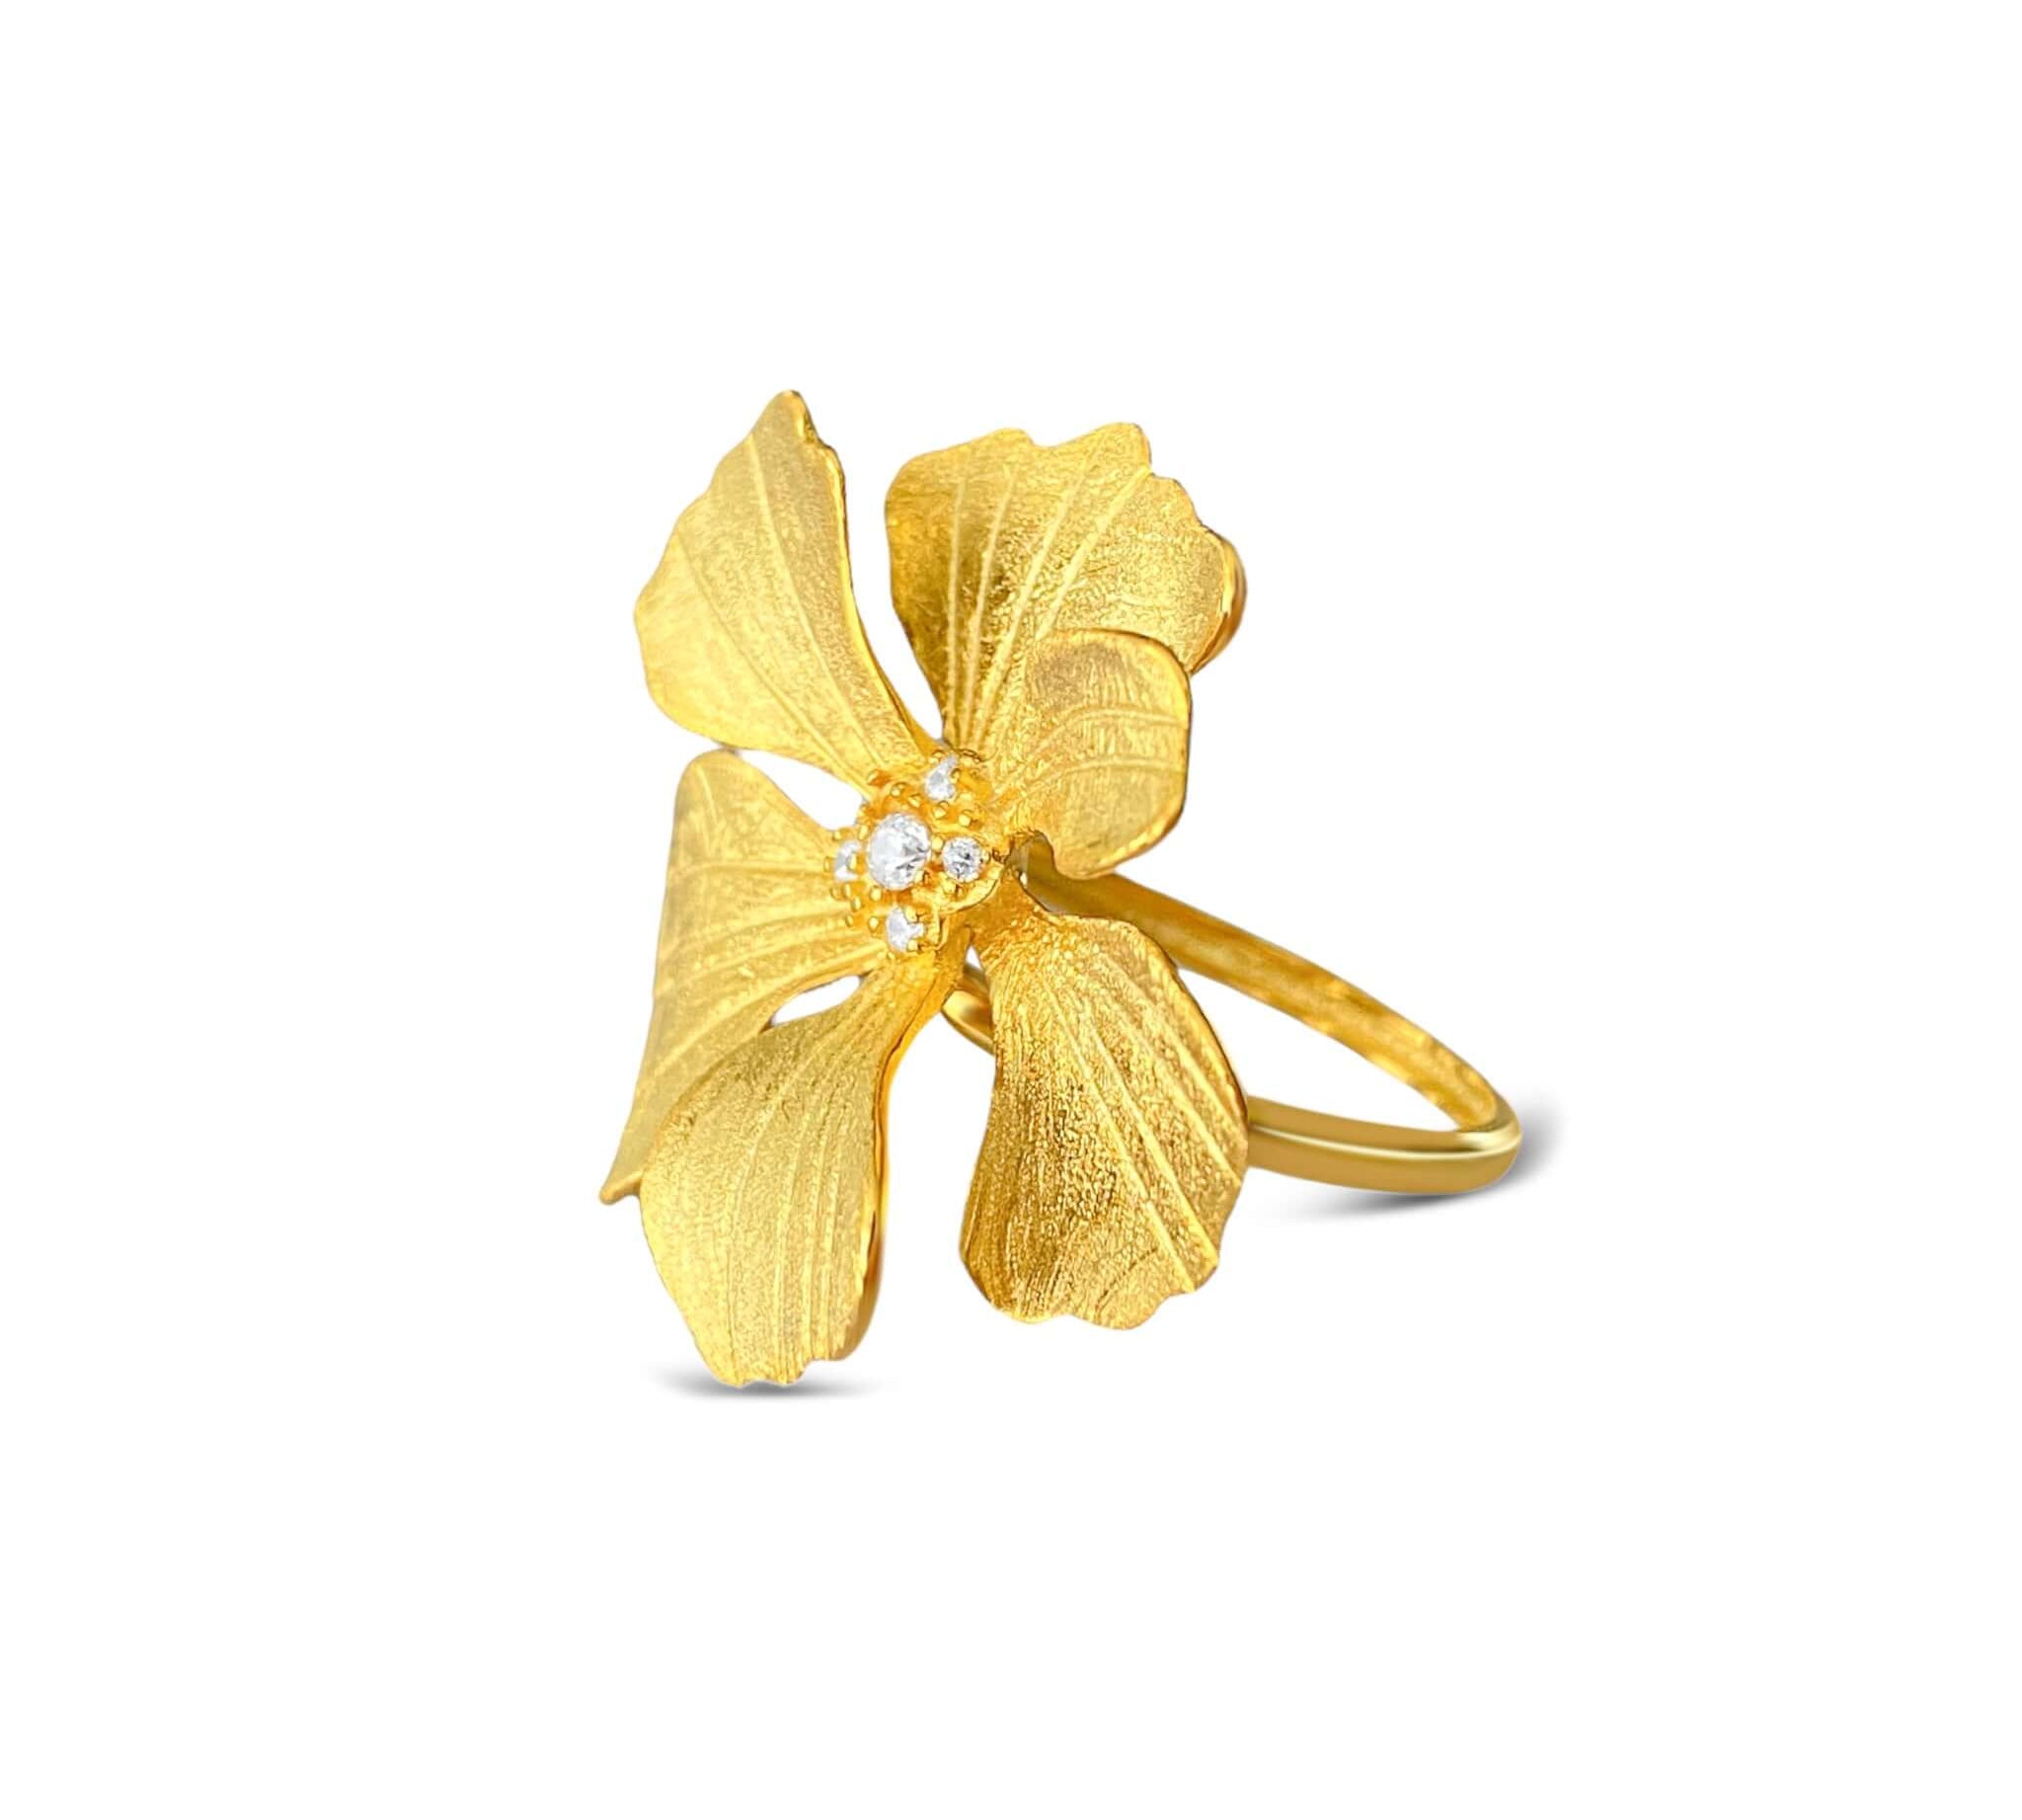 Delicate gold Peony Cocktail Ring with intricate petal detailing by Alessandra James.